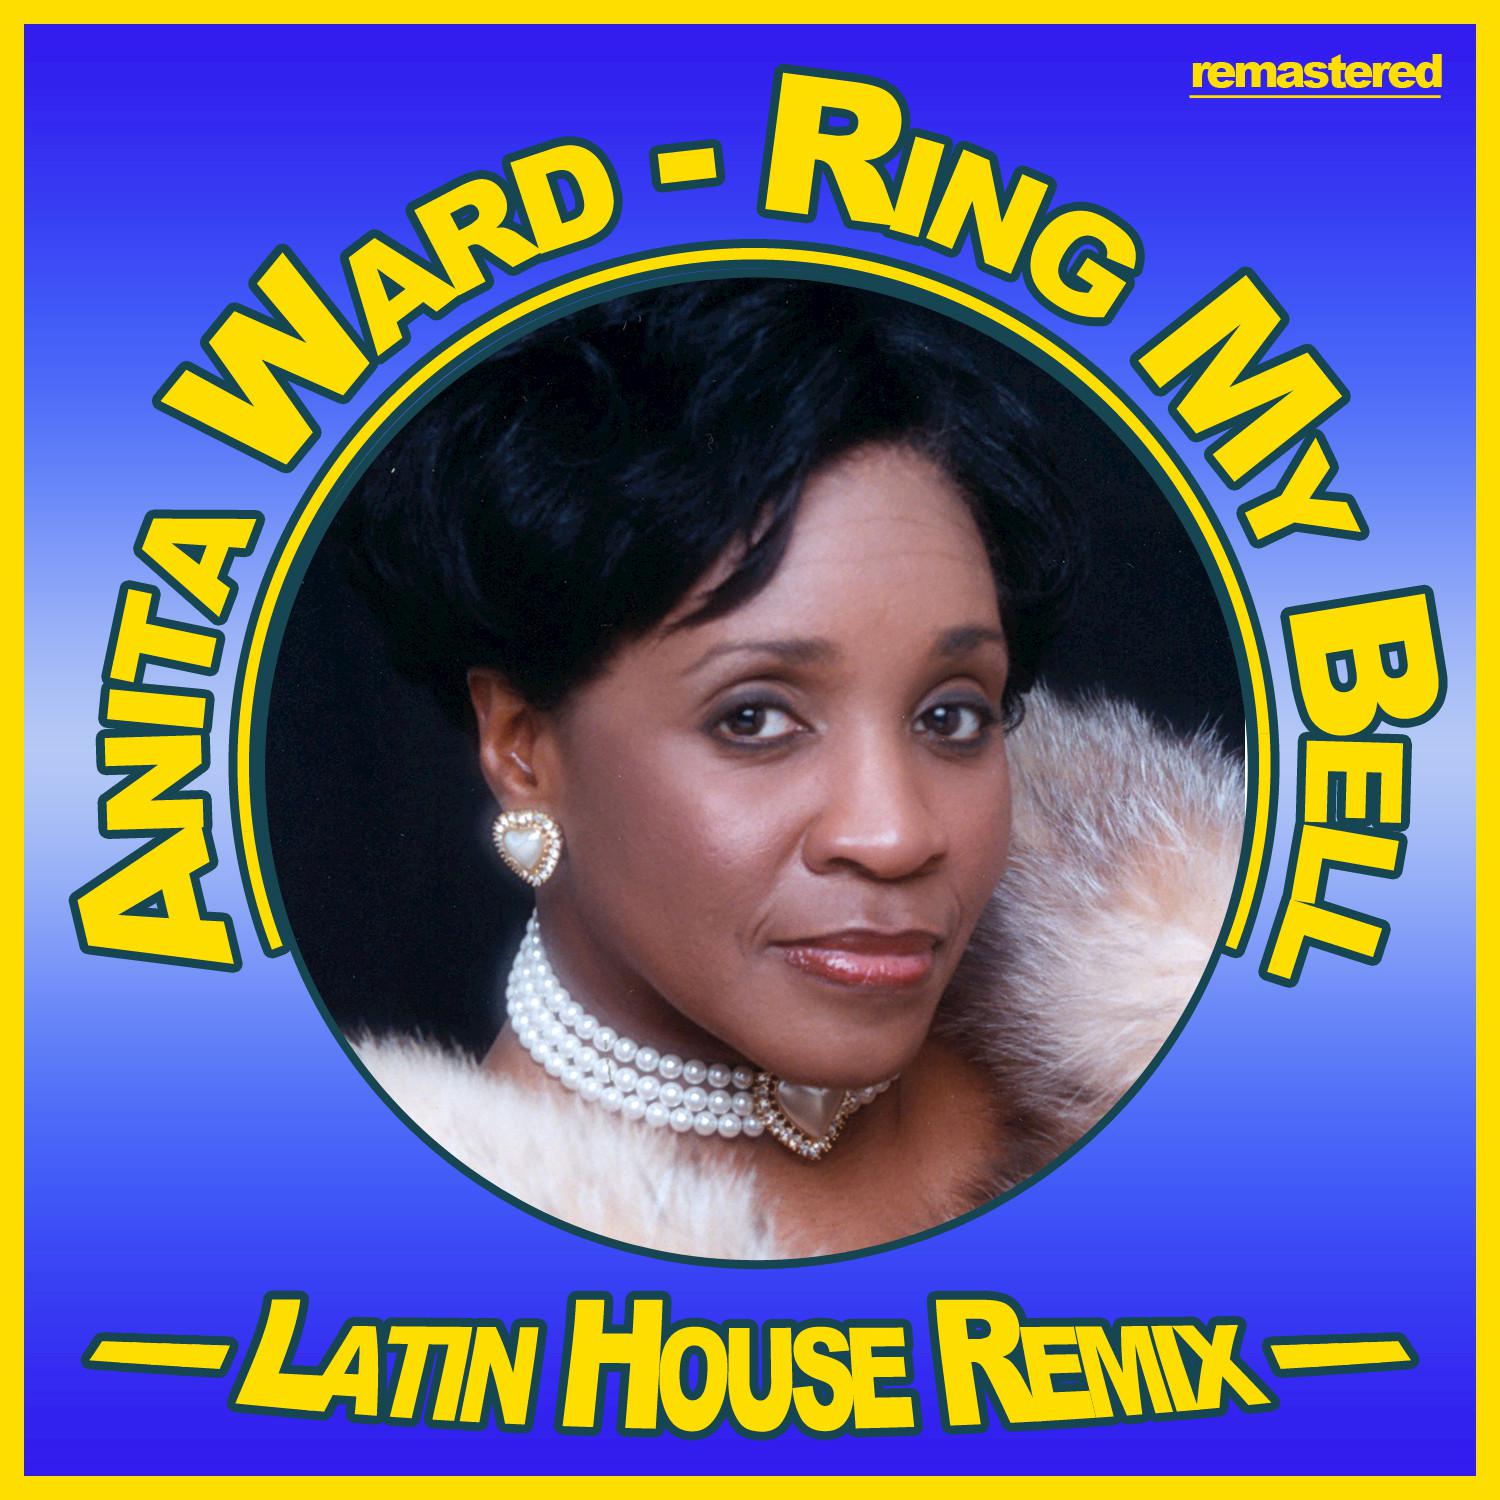 Ring My Bell (Latin House Remix)